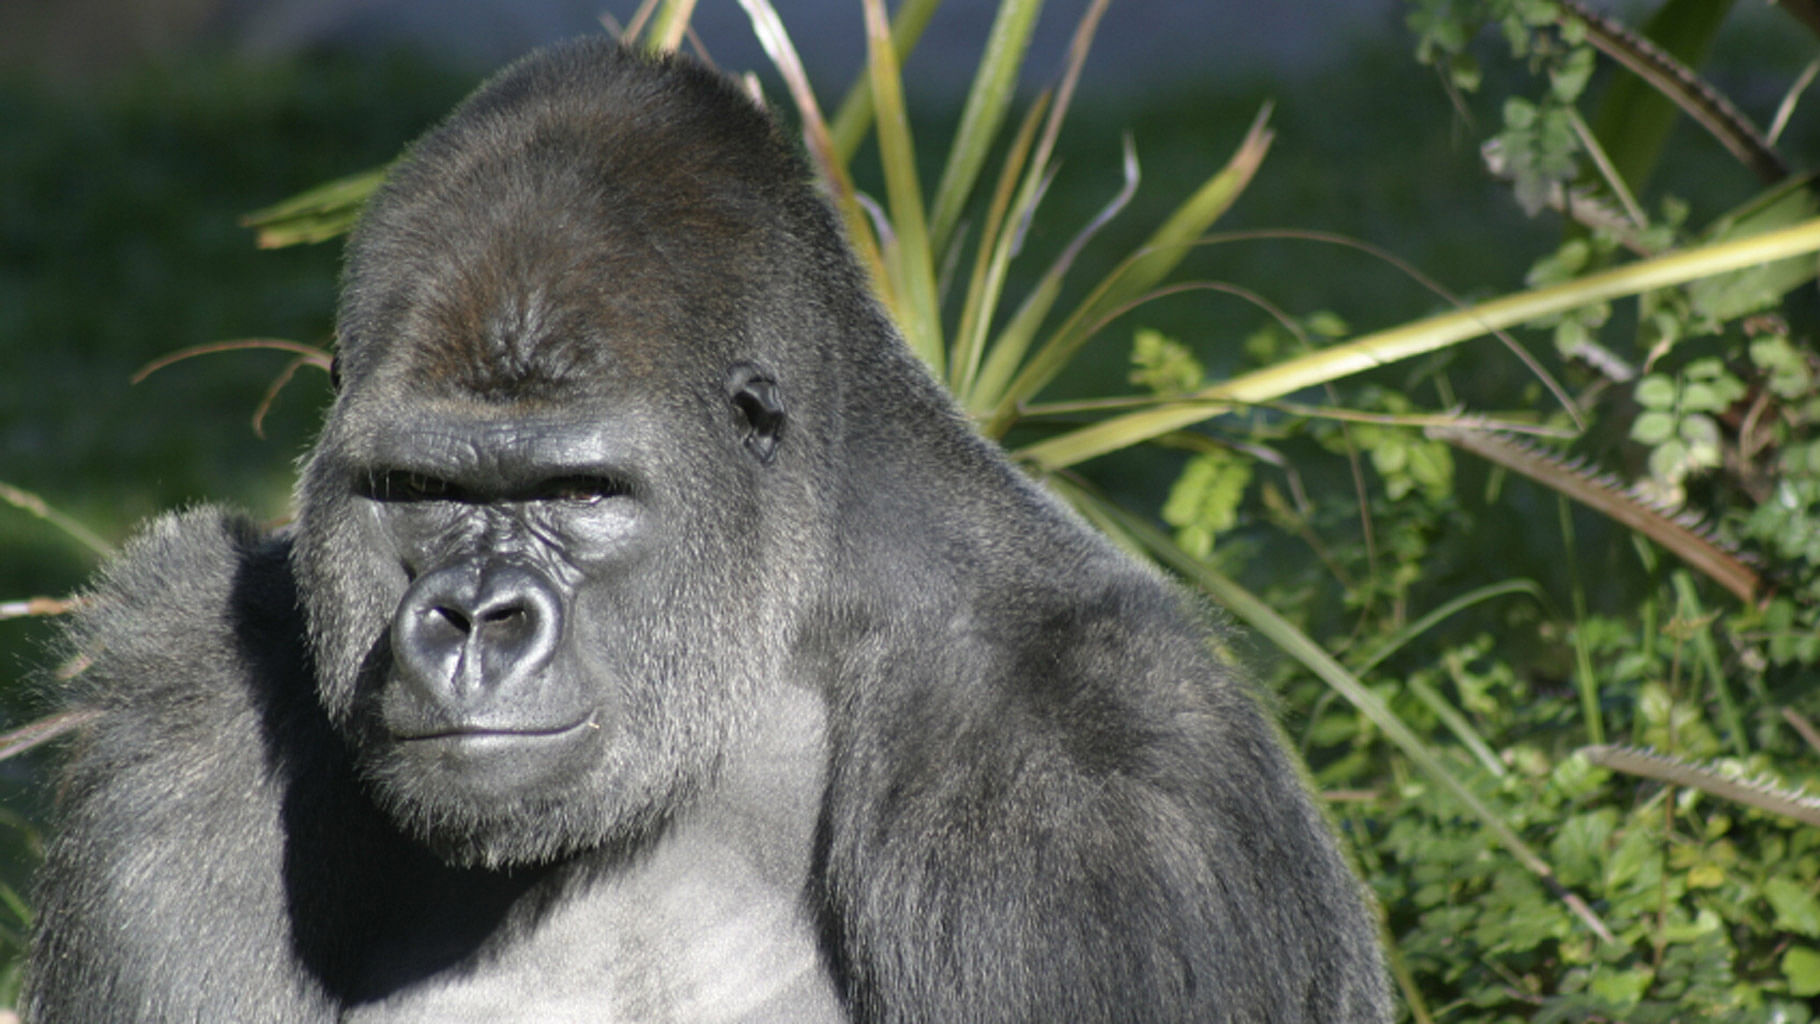 He said the gorilla didn’t appear to be attacking the child, but he said it was “an extremely strong” animal in an agitated situation. (Photo: iStockPhoto)